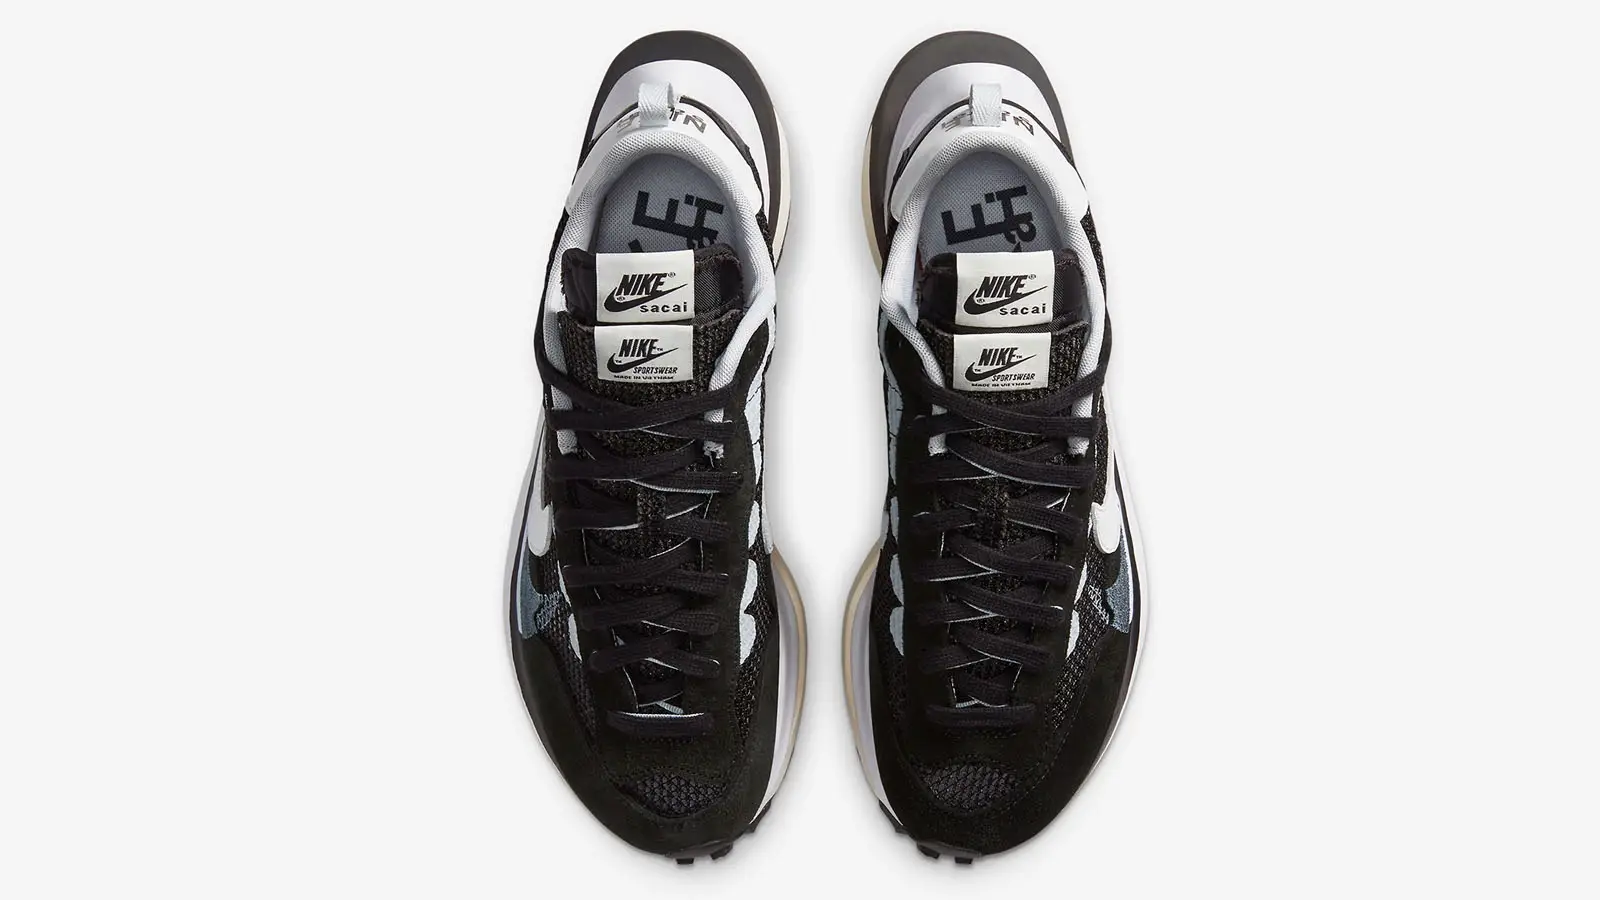 Official Images Of The sacai x Nike Vaporwaffle Have Landed | The Sole ...